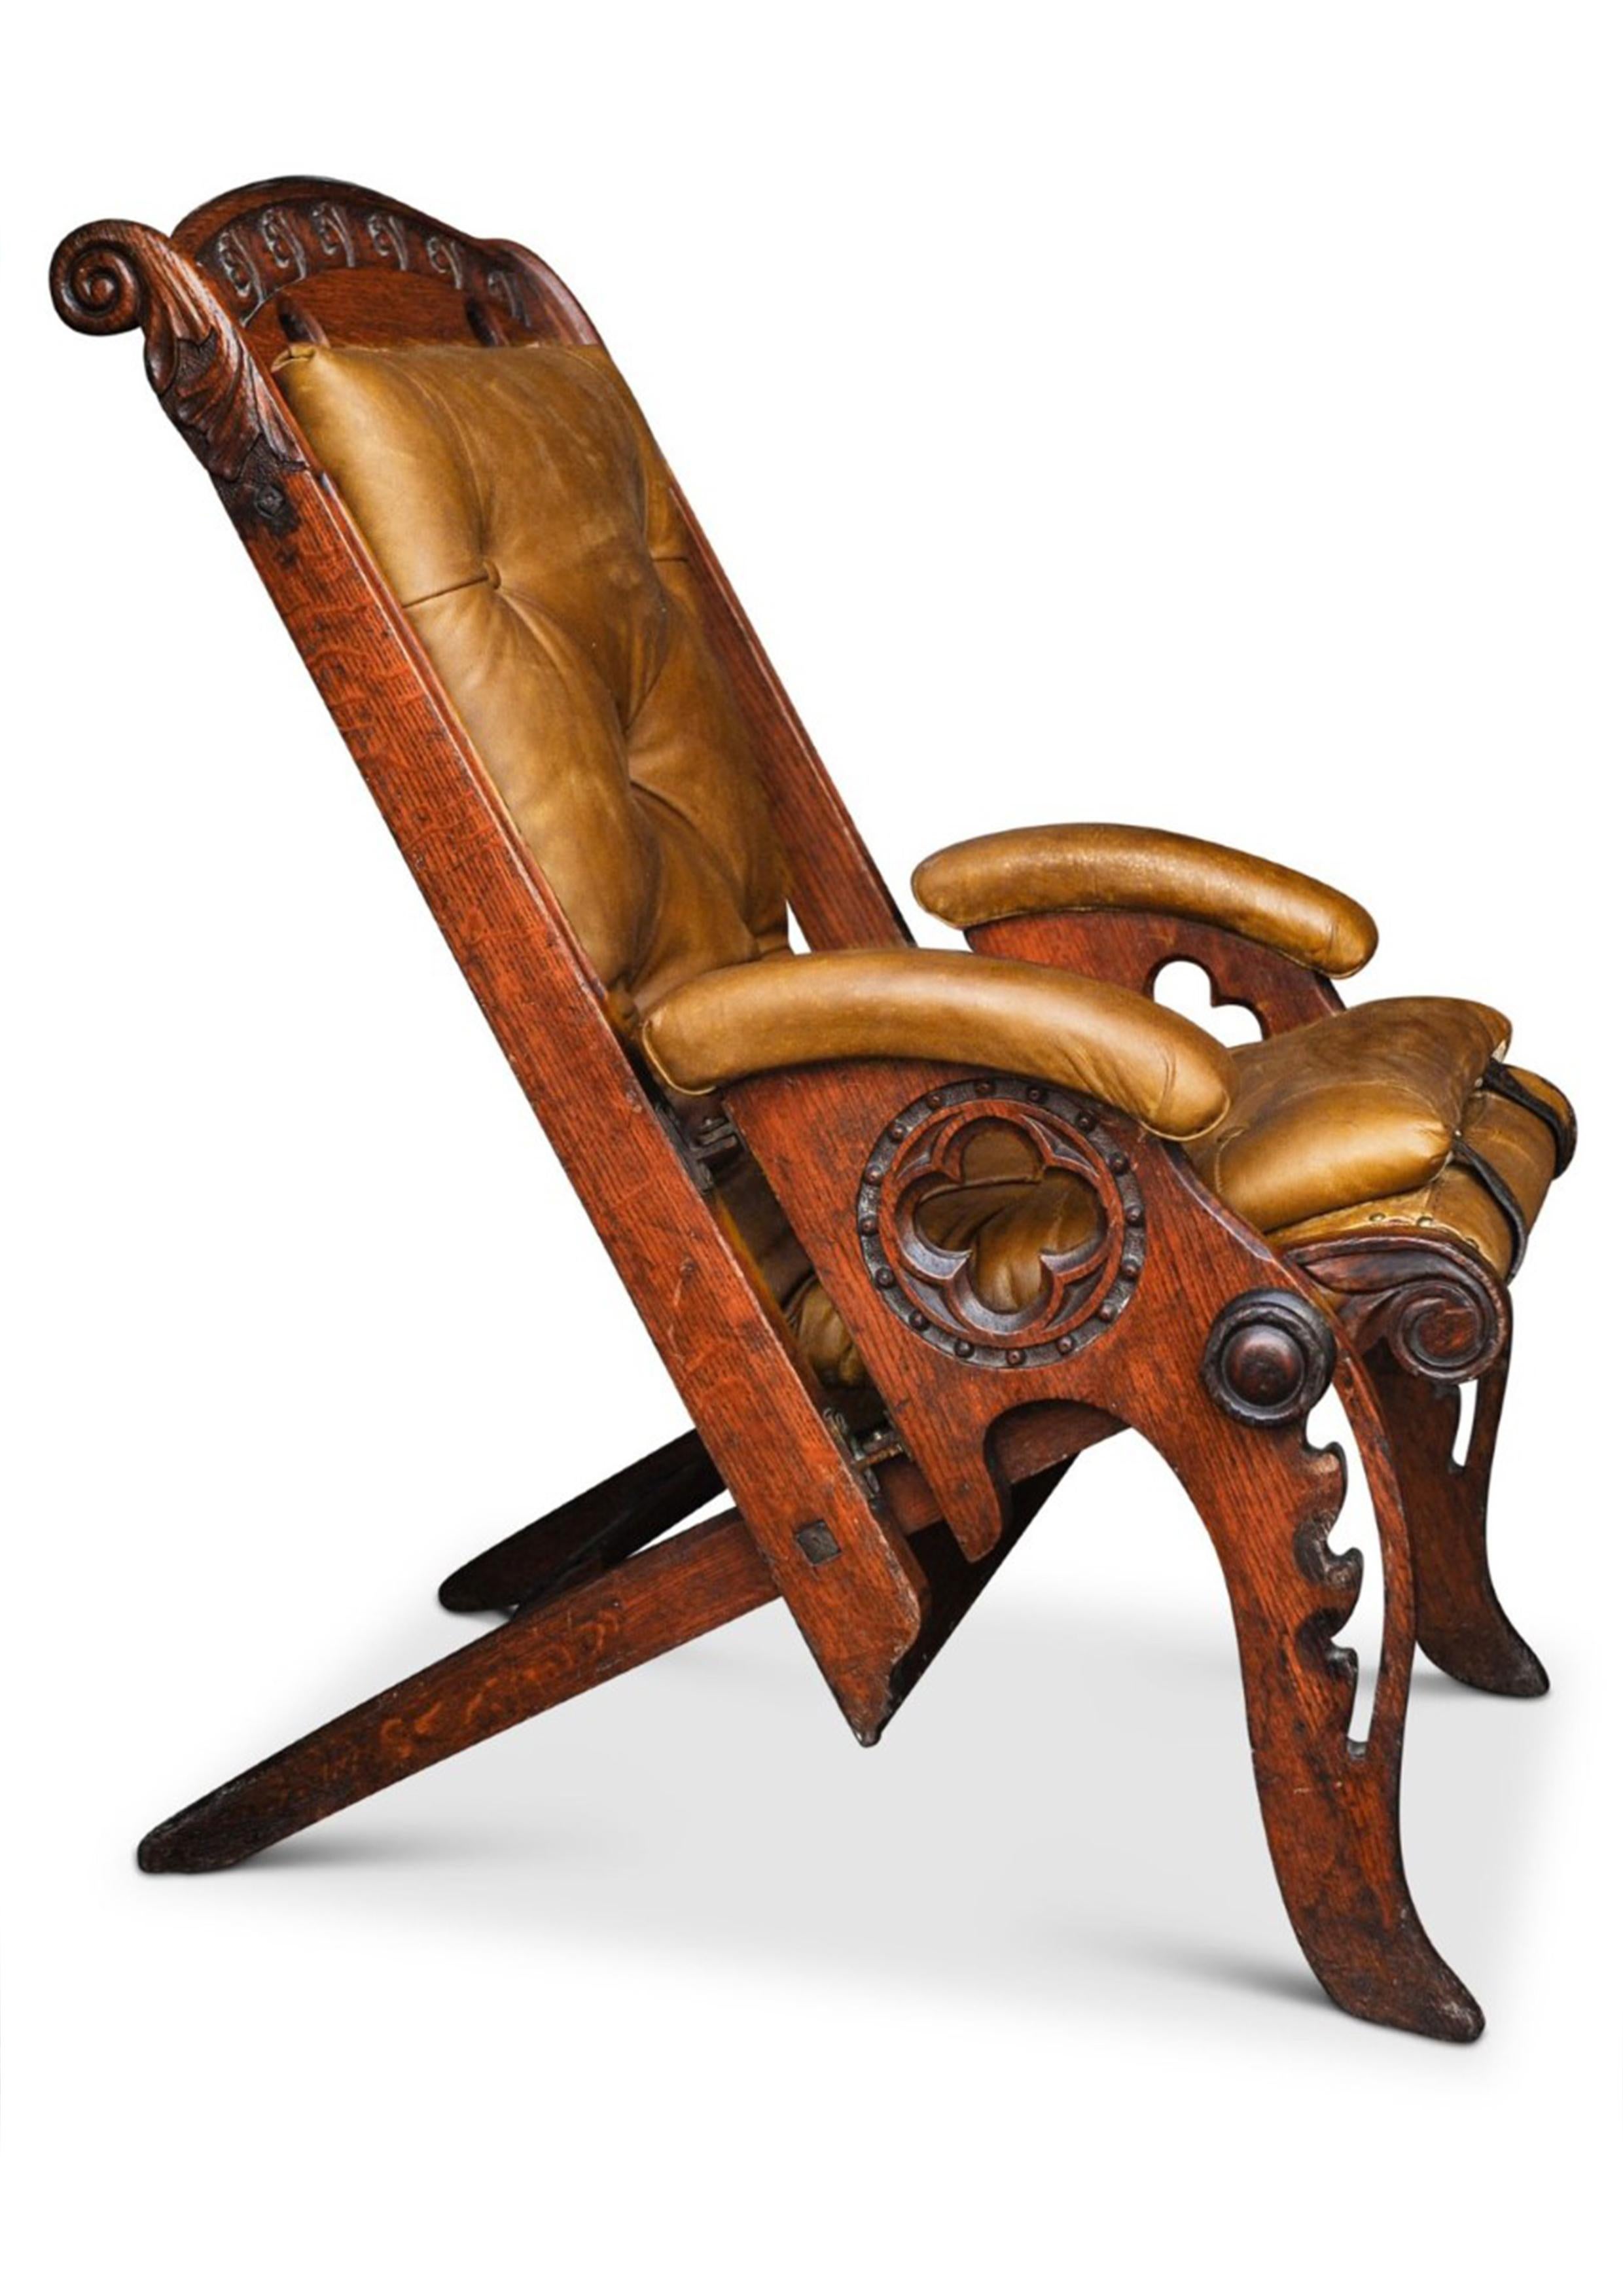 British Colonial 19th Century Campaign Chair Herbert McNair Design Carved Oak and Tan Leather For Sale